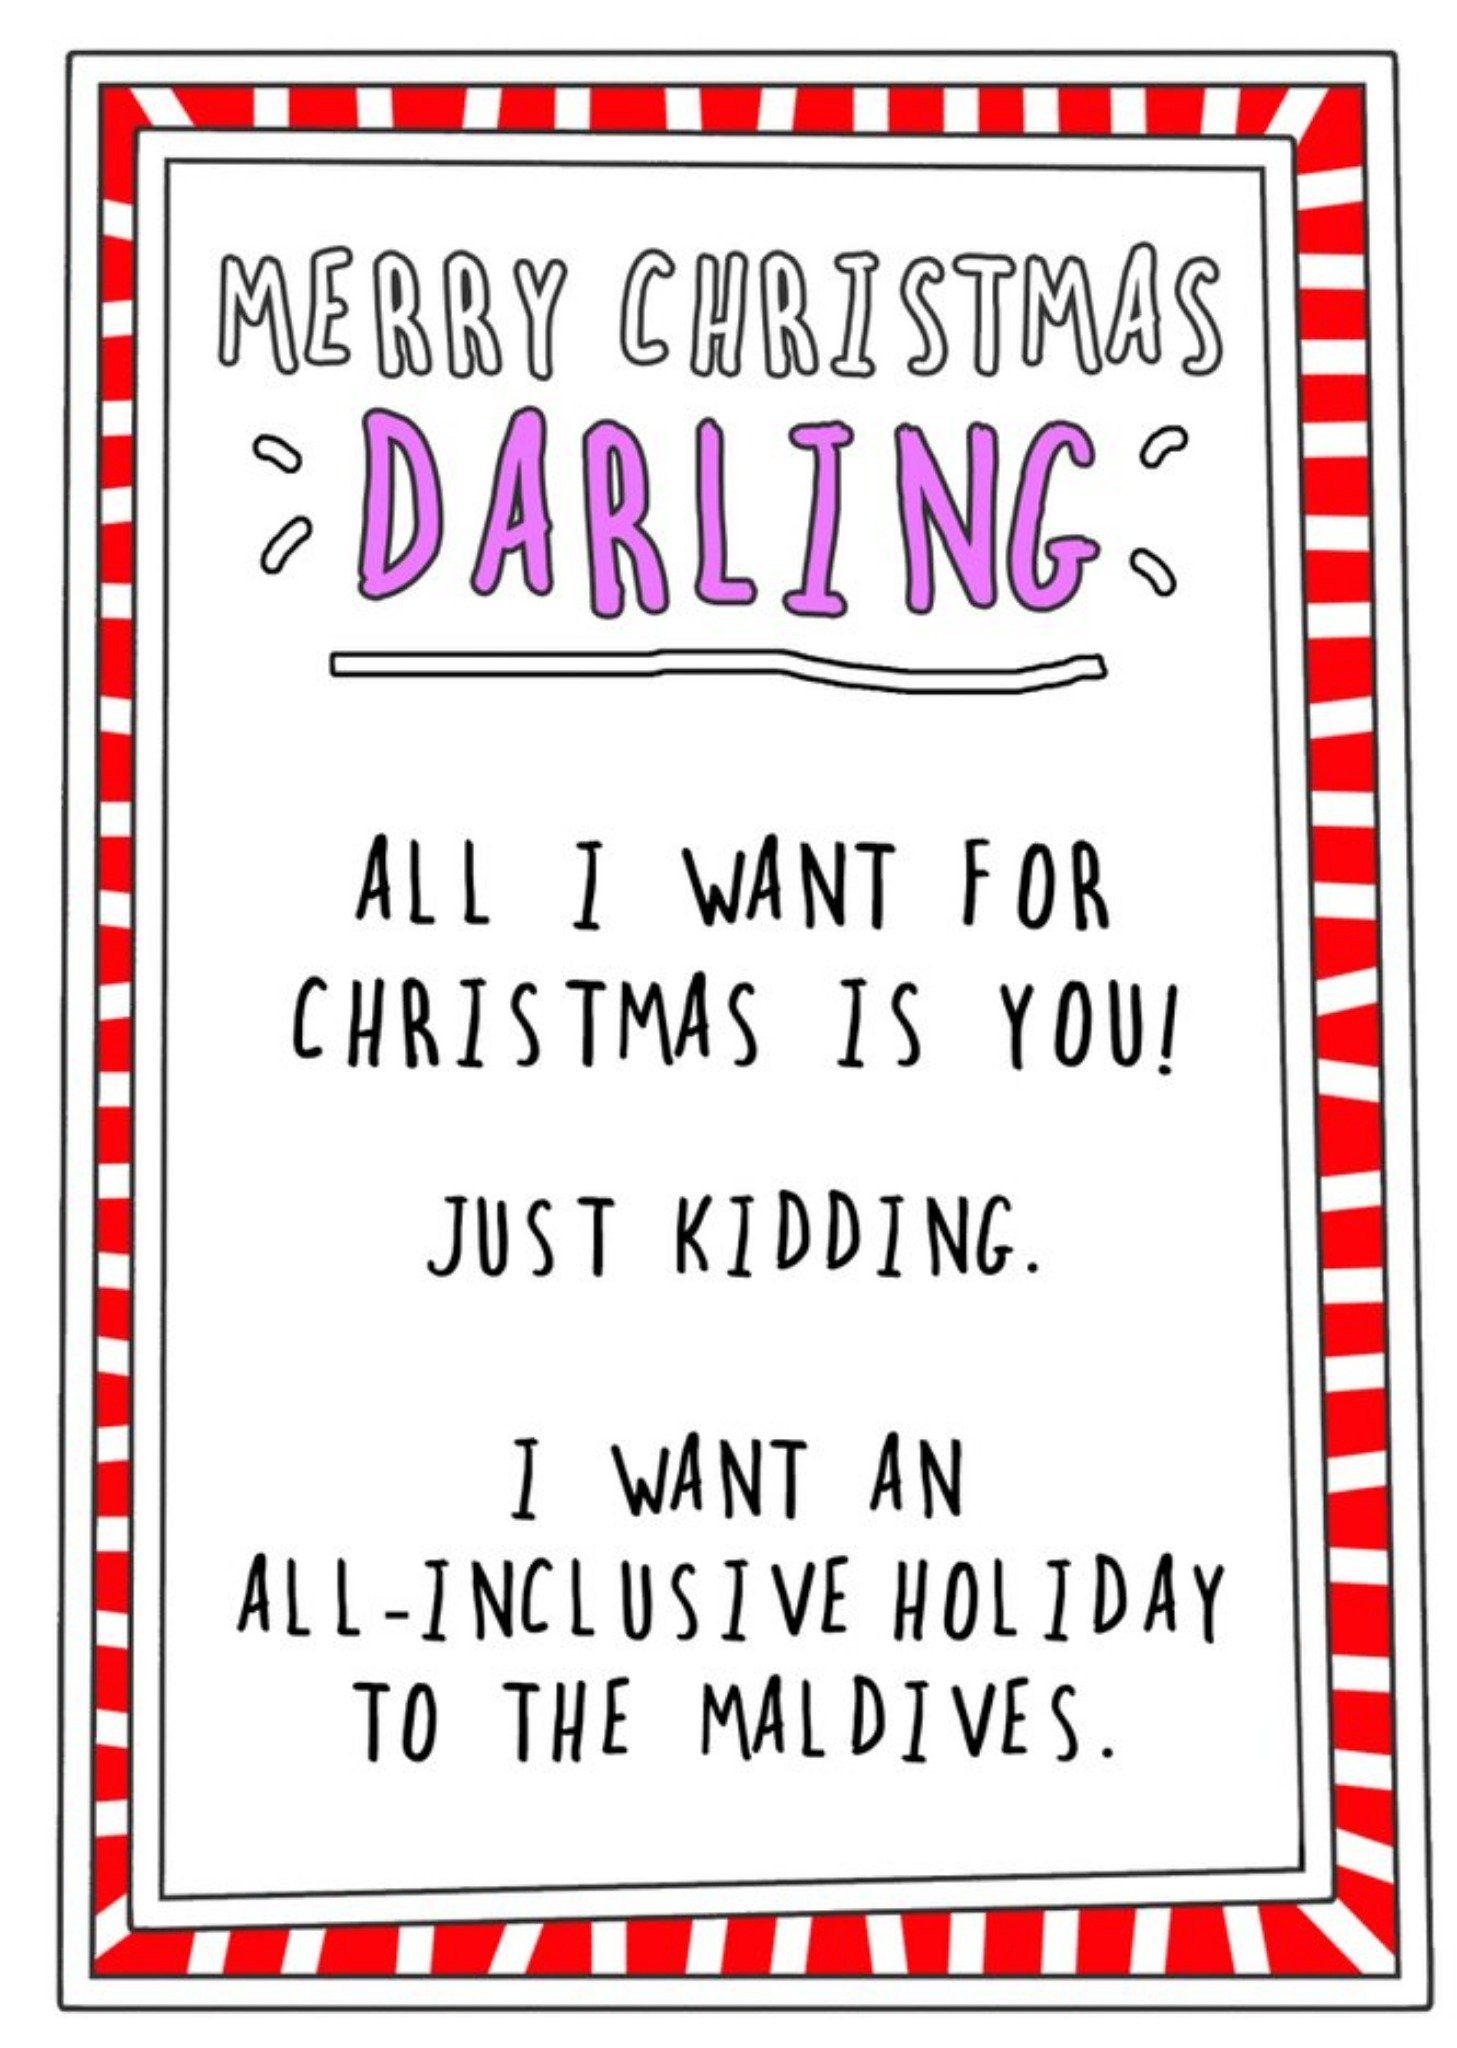 Go La La Funny Merry Christmas Darling All I Want For Christmas Is You And The Maldives Card Ecard